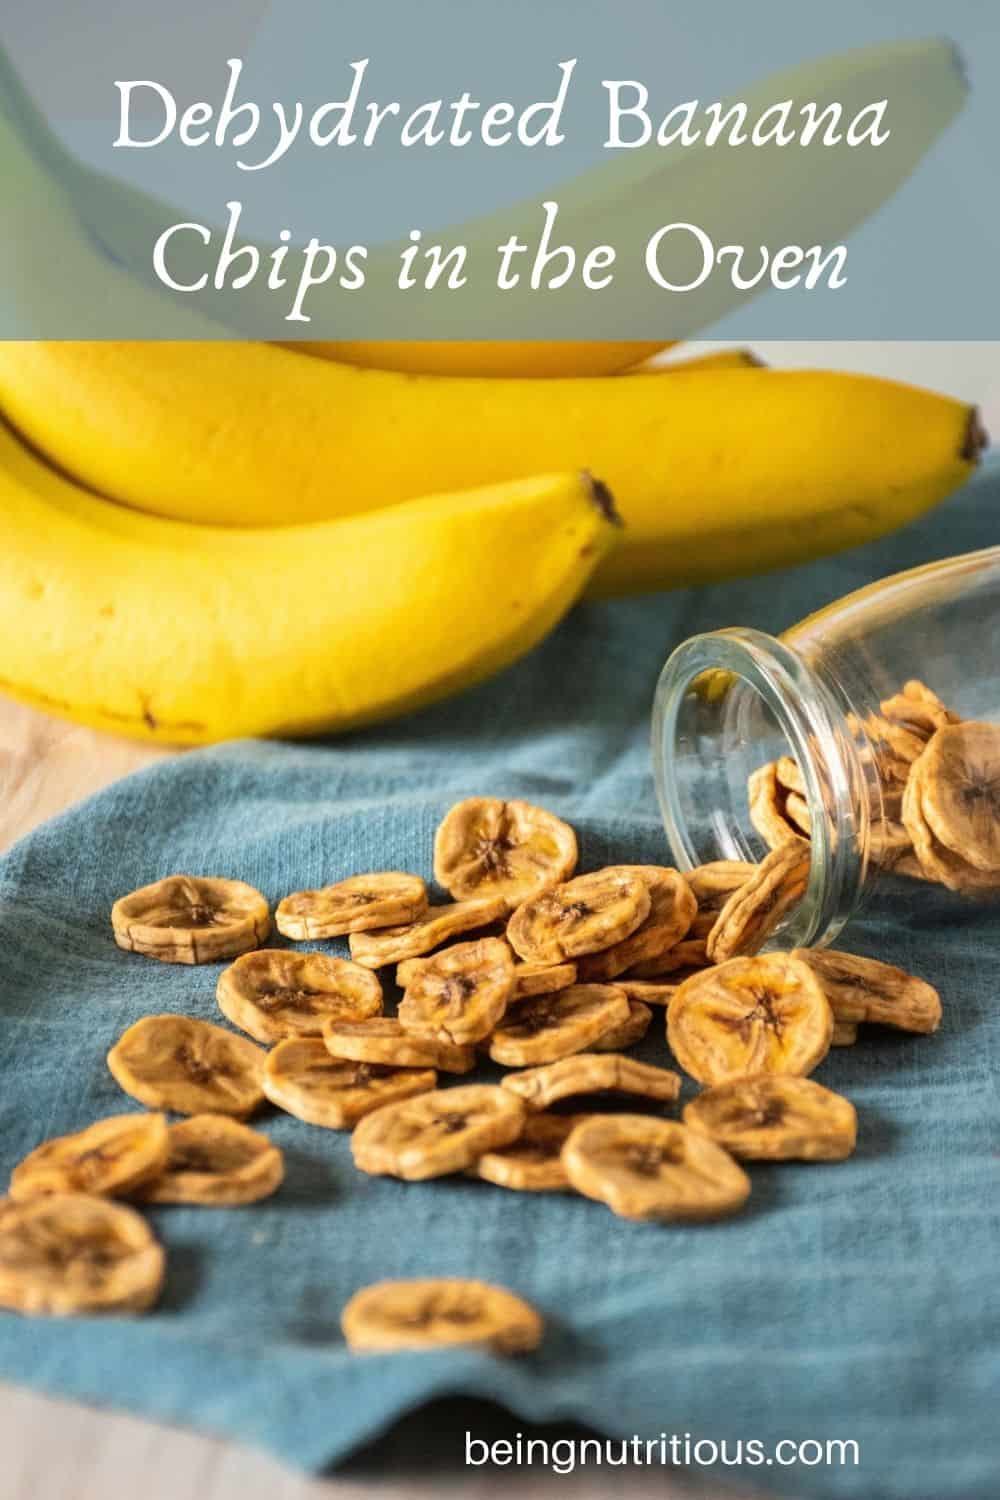 Dehydrated banana chips spilling out of a glass jar. Text overlay: Dehydrated Banana Chips in the Oven